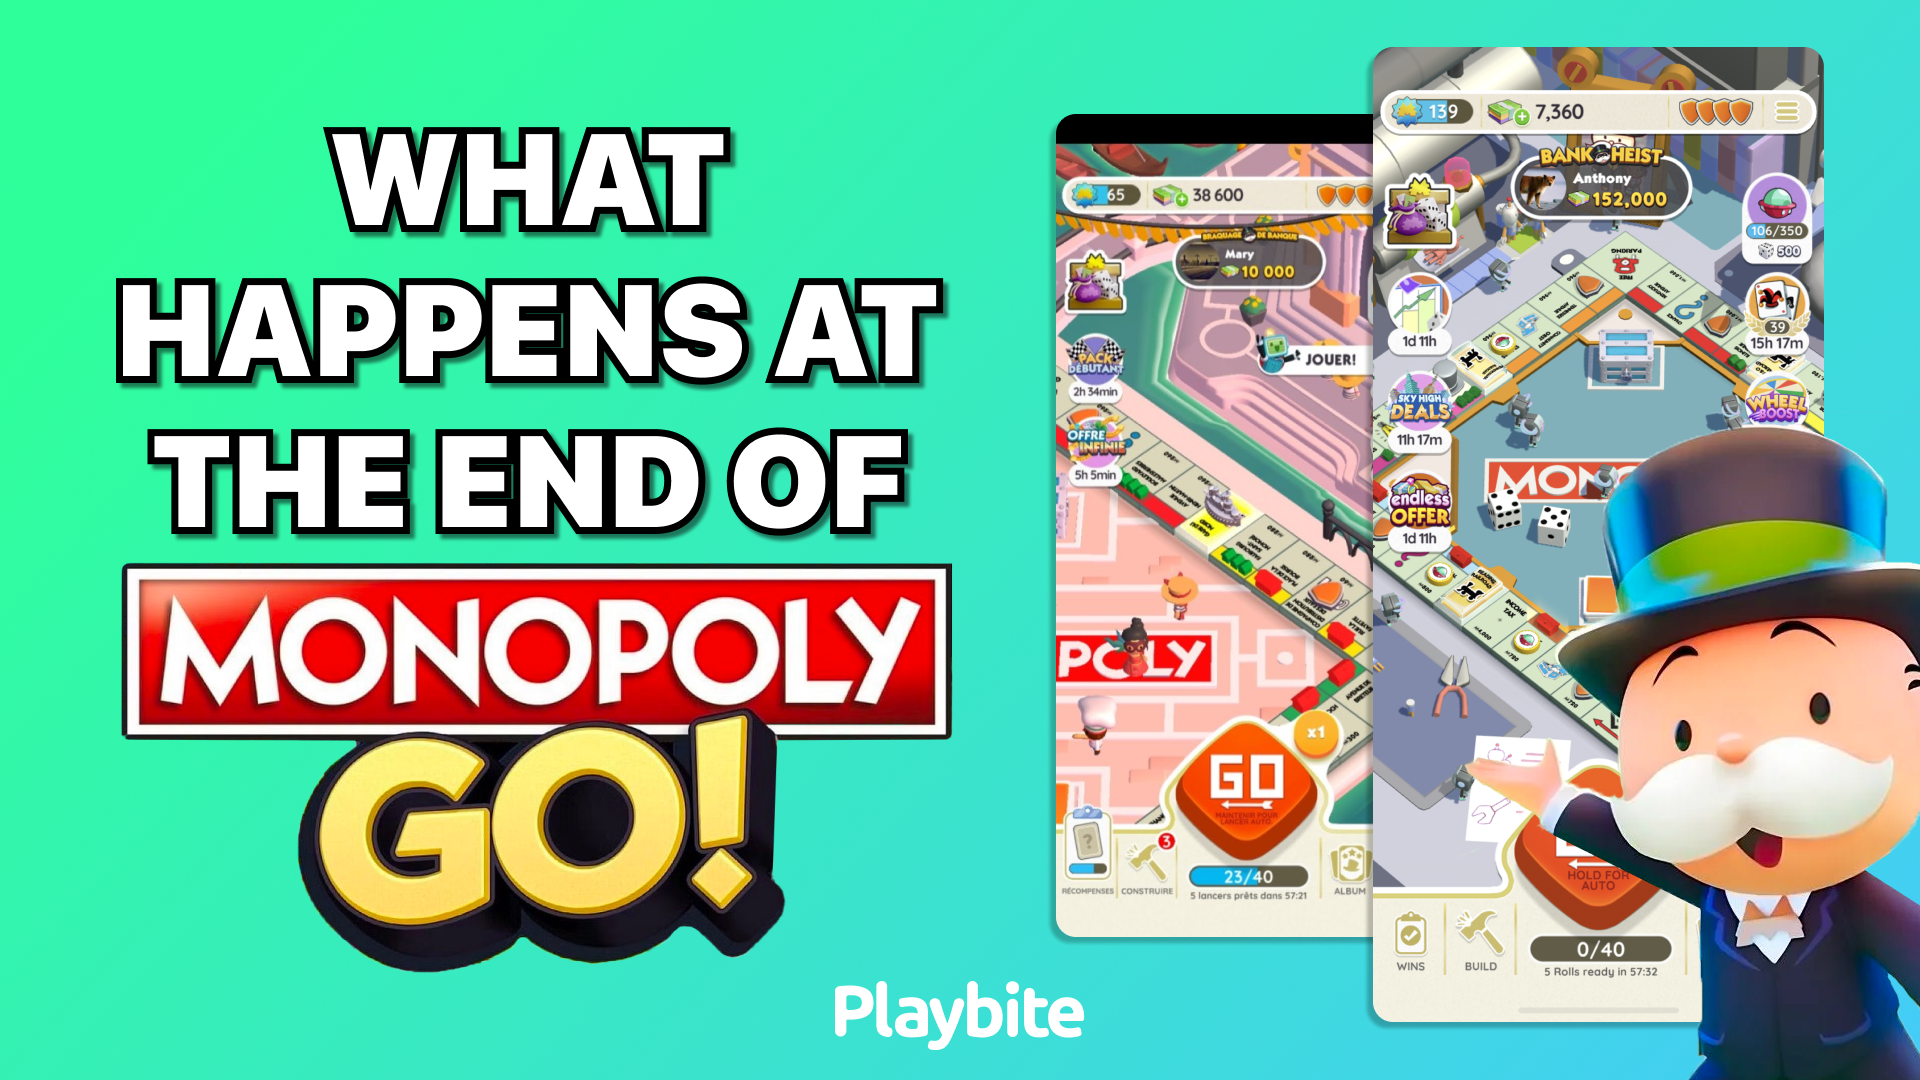 What Happens at the End of Monopoly Go?